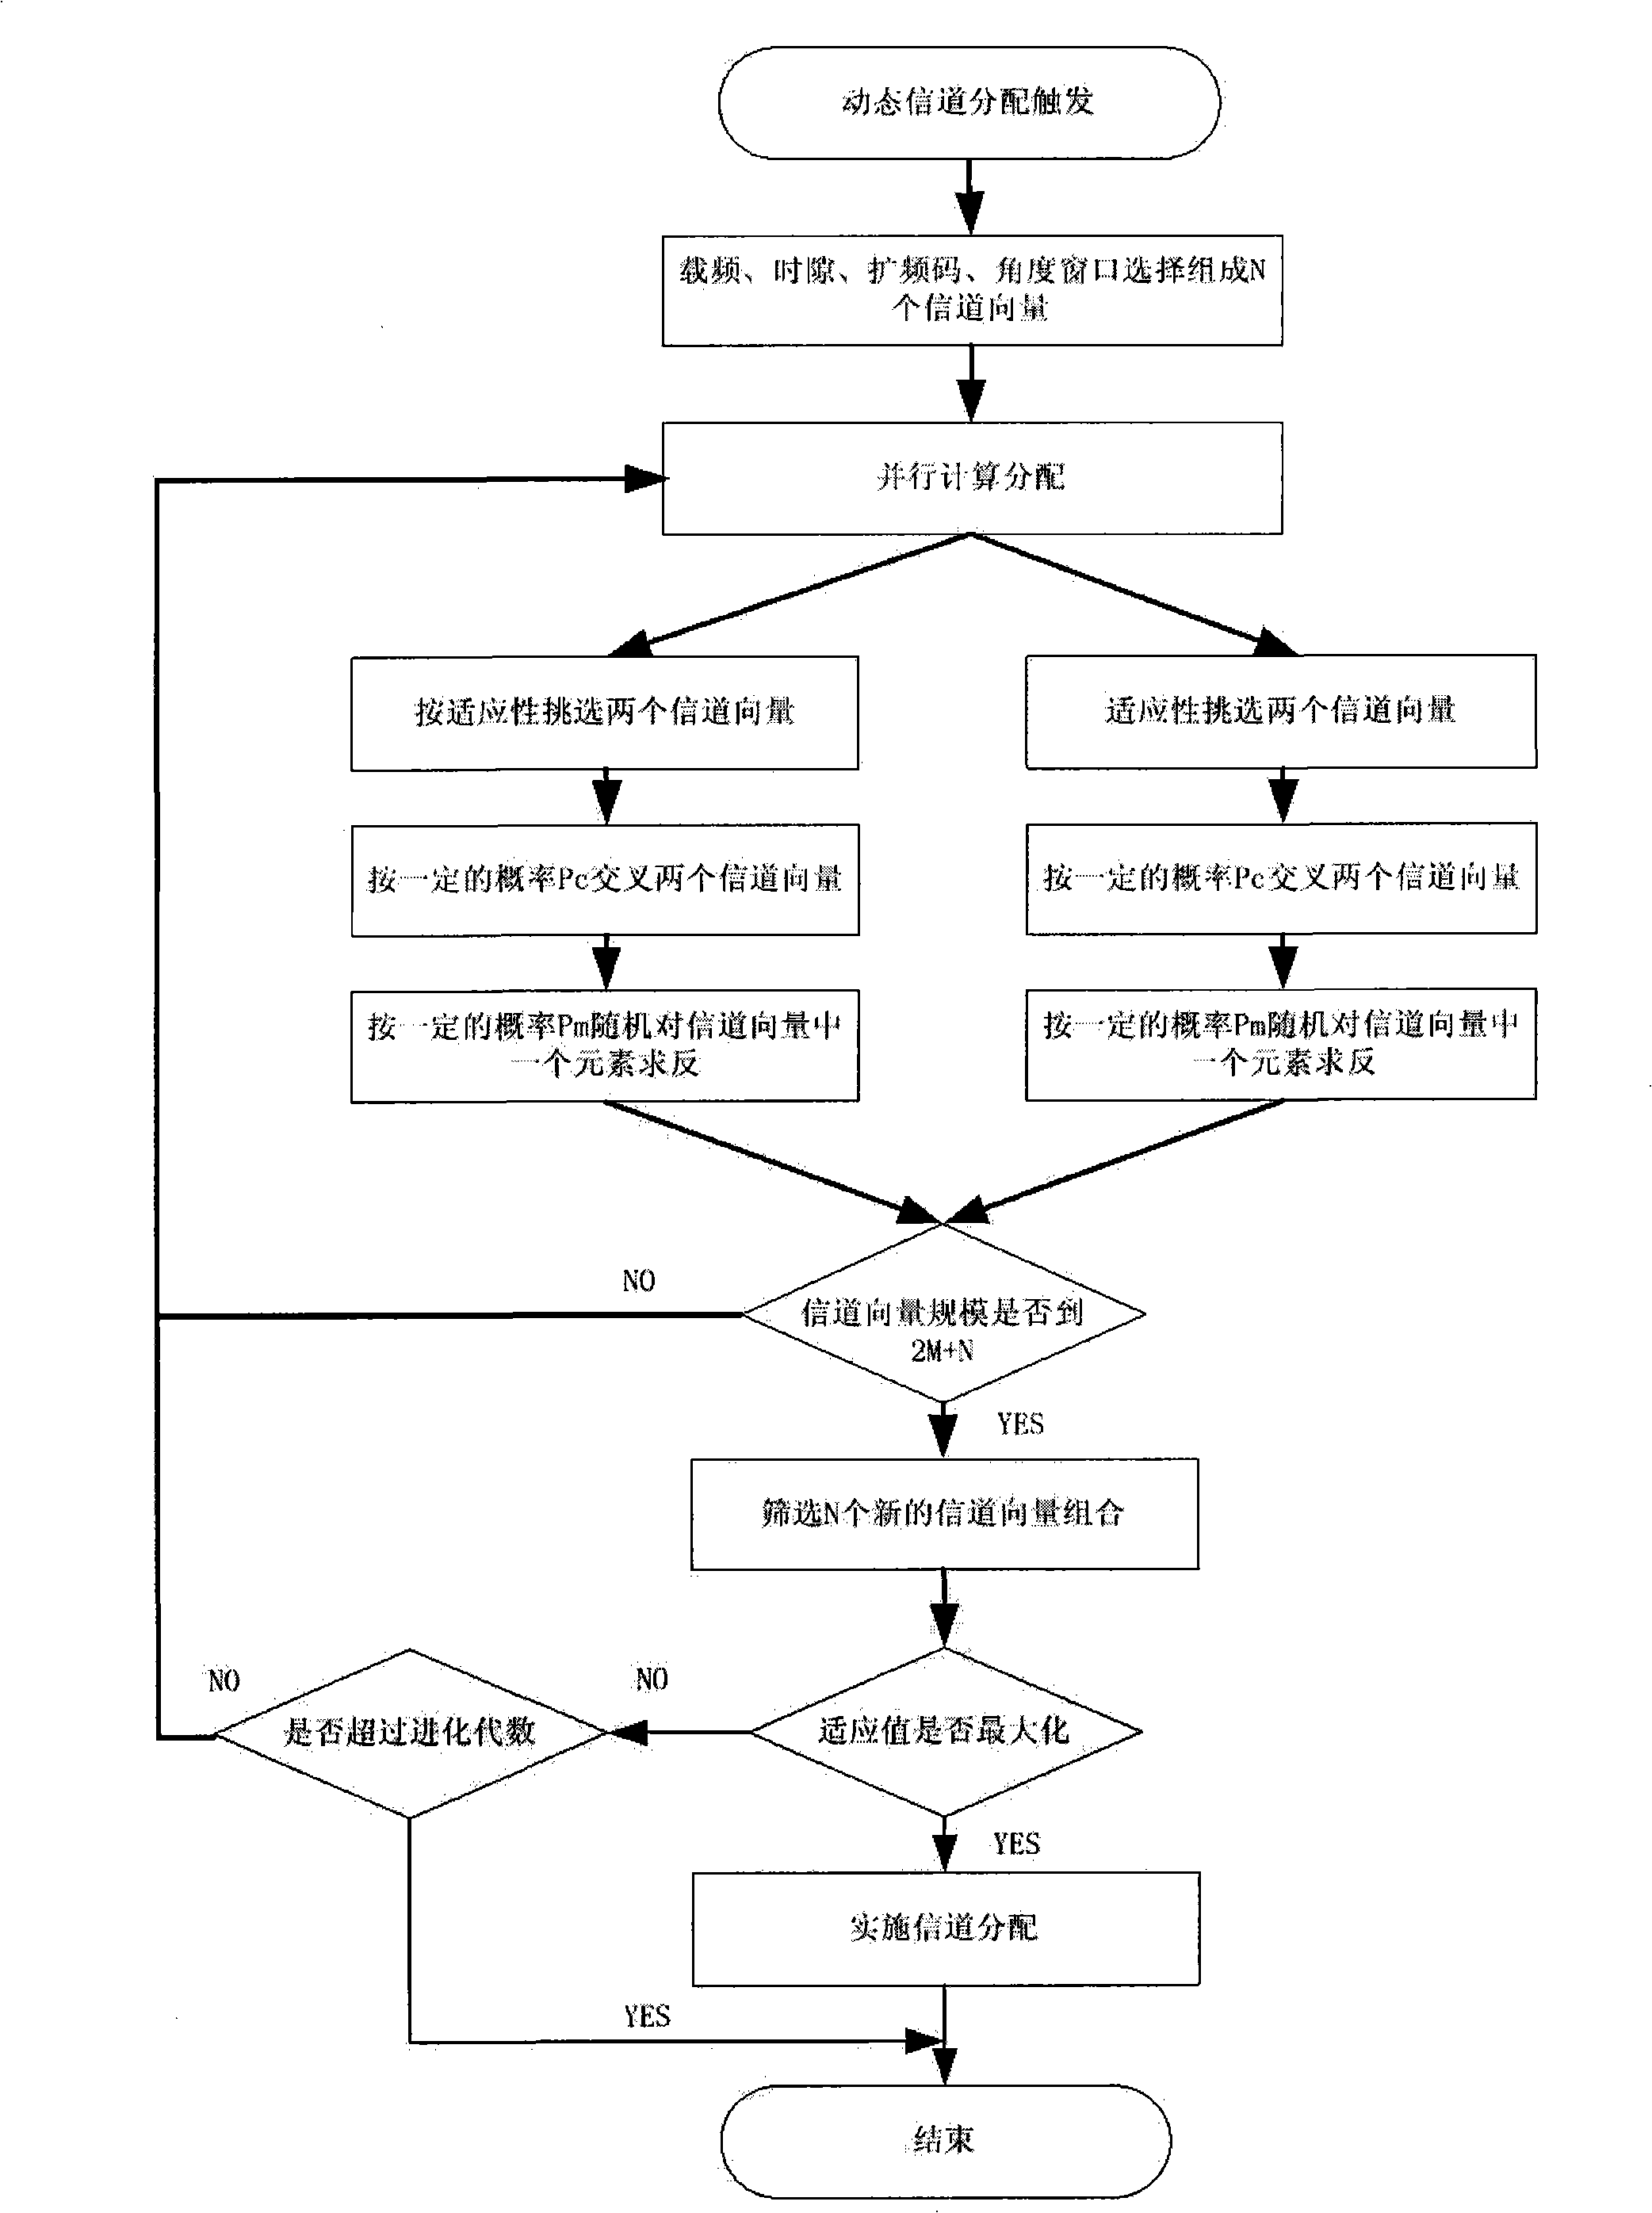 A dynamic channel allocation method based on generic algorithm